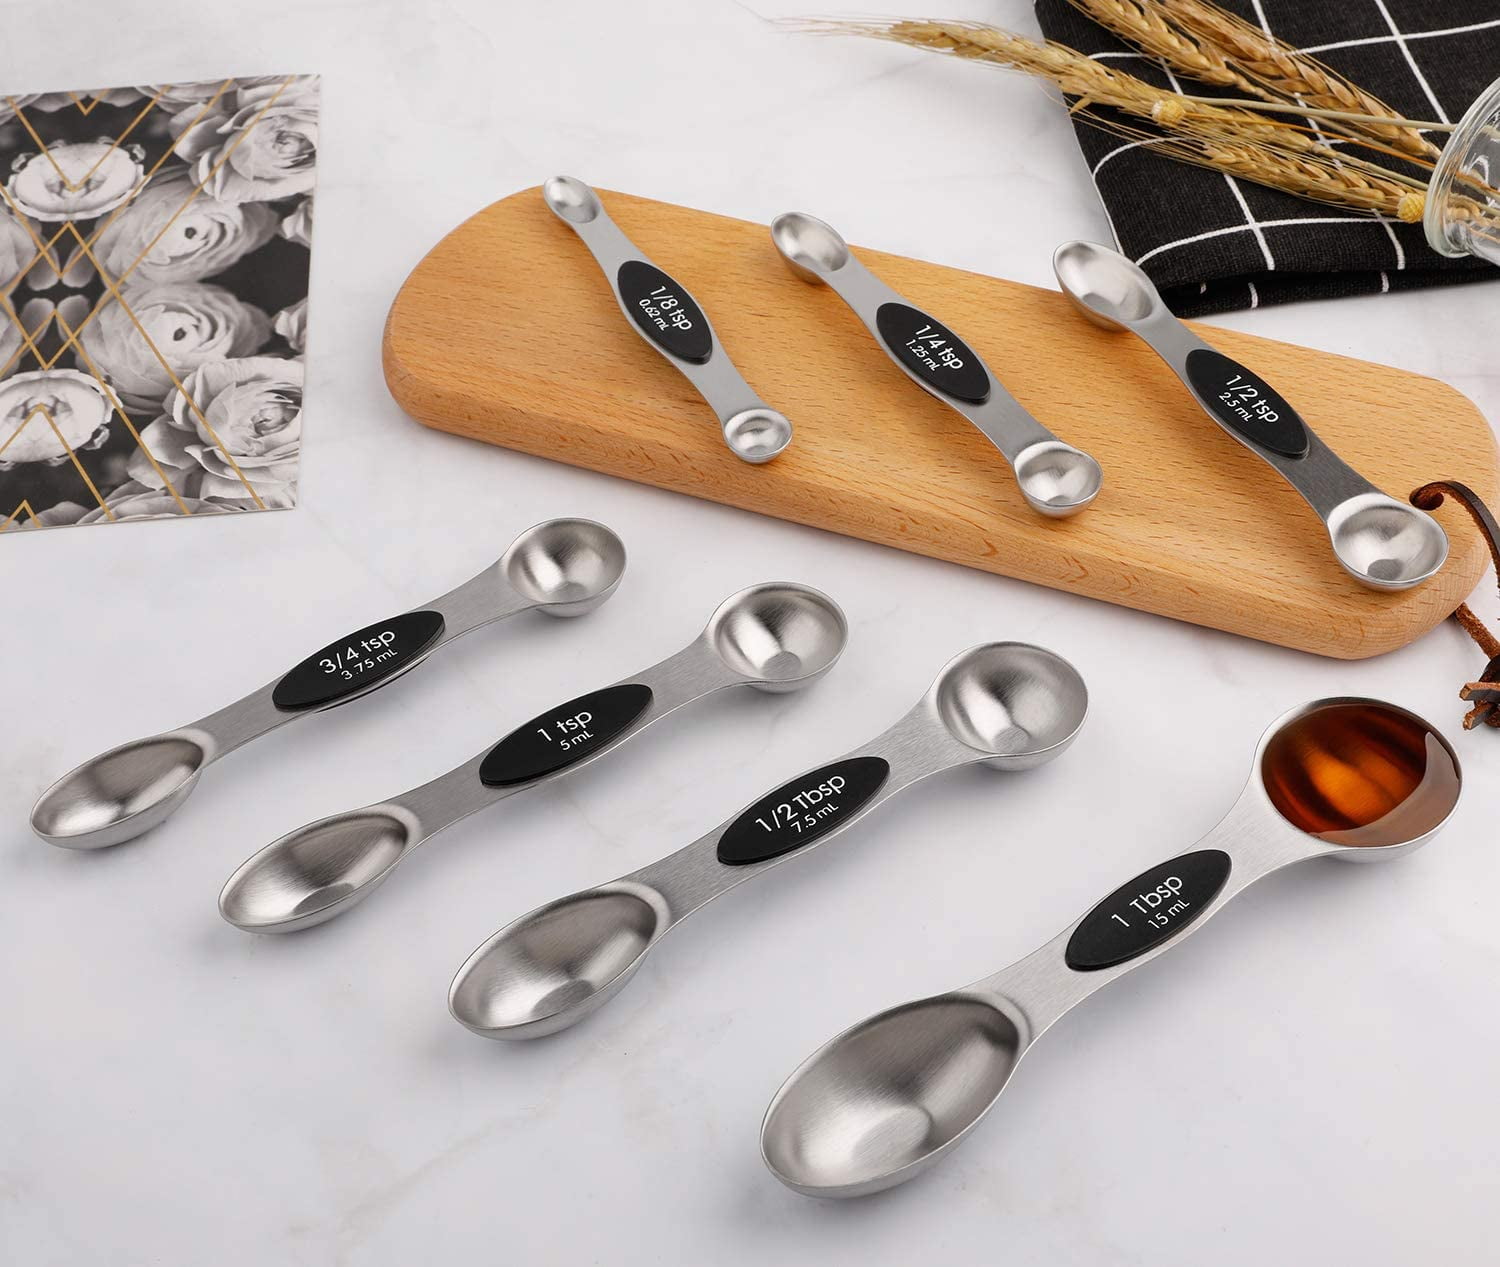 Magnetic Measuring Spoons Set - Wildone Stainless Steel Double Sided Measuring Spoons Set of 7, for Dry and Liquid Ingredients, Including 6 Heavy Duty